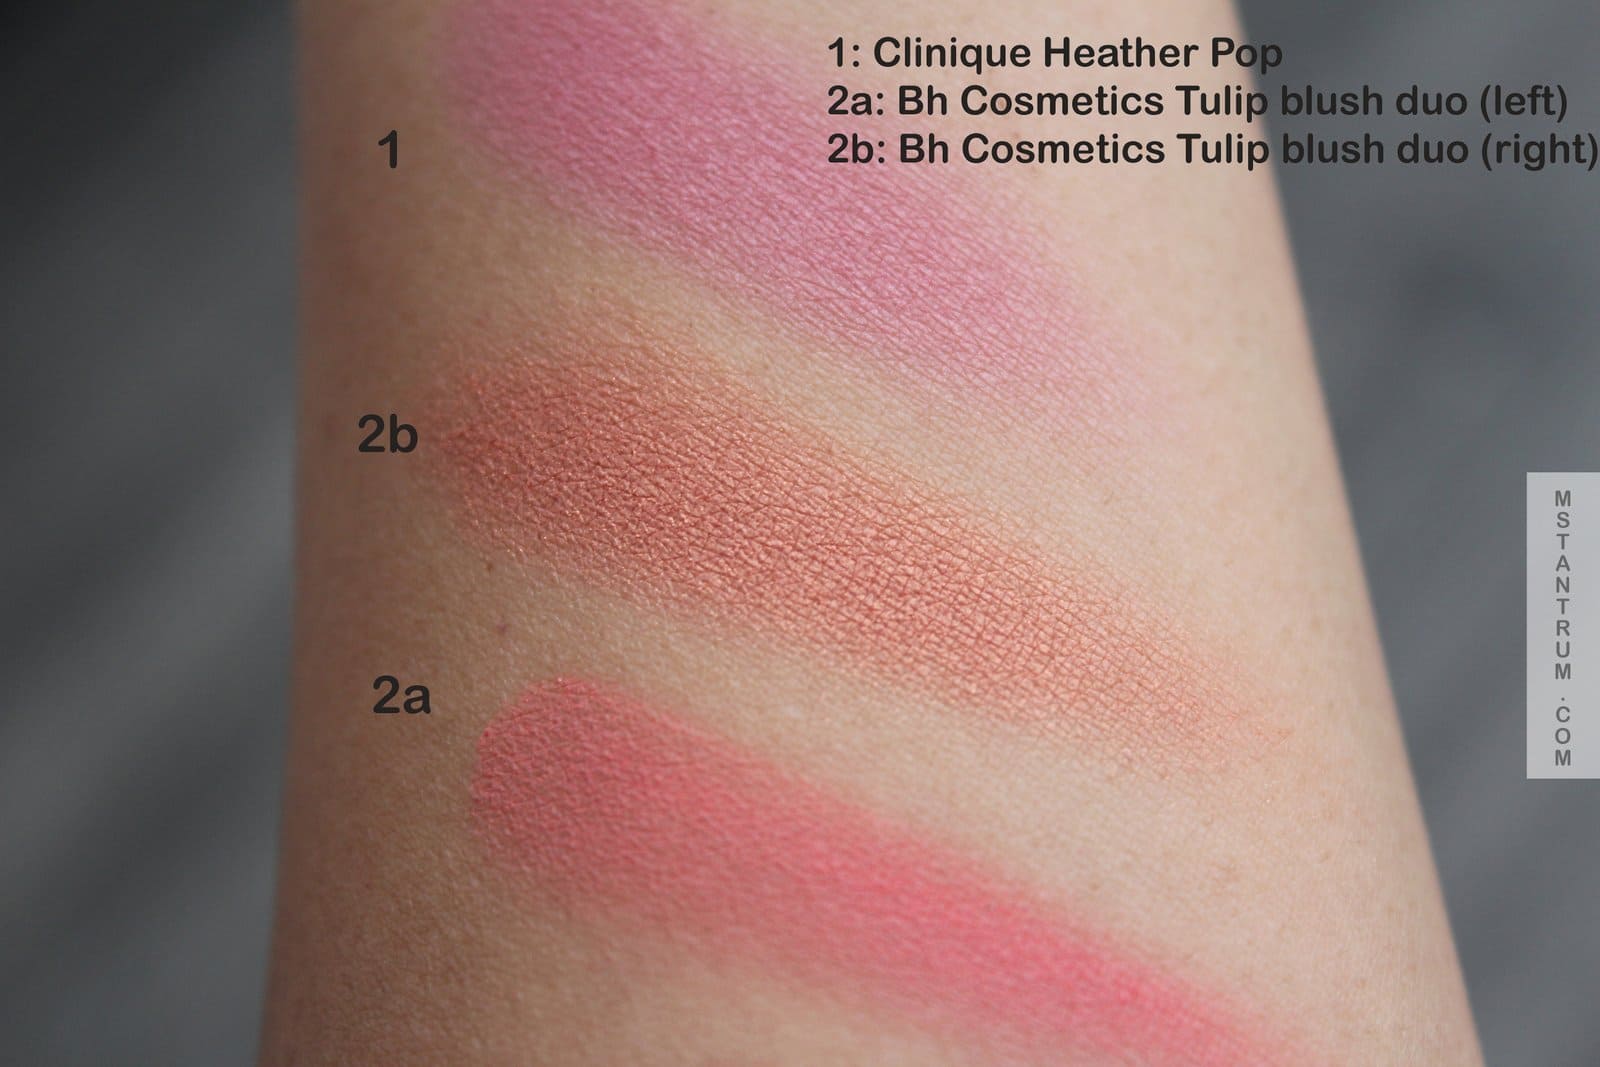 BH cosmetics Tulip and Clinique Heather pop blush swatches